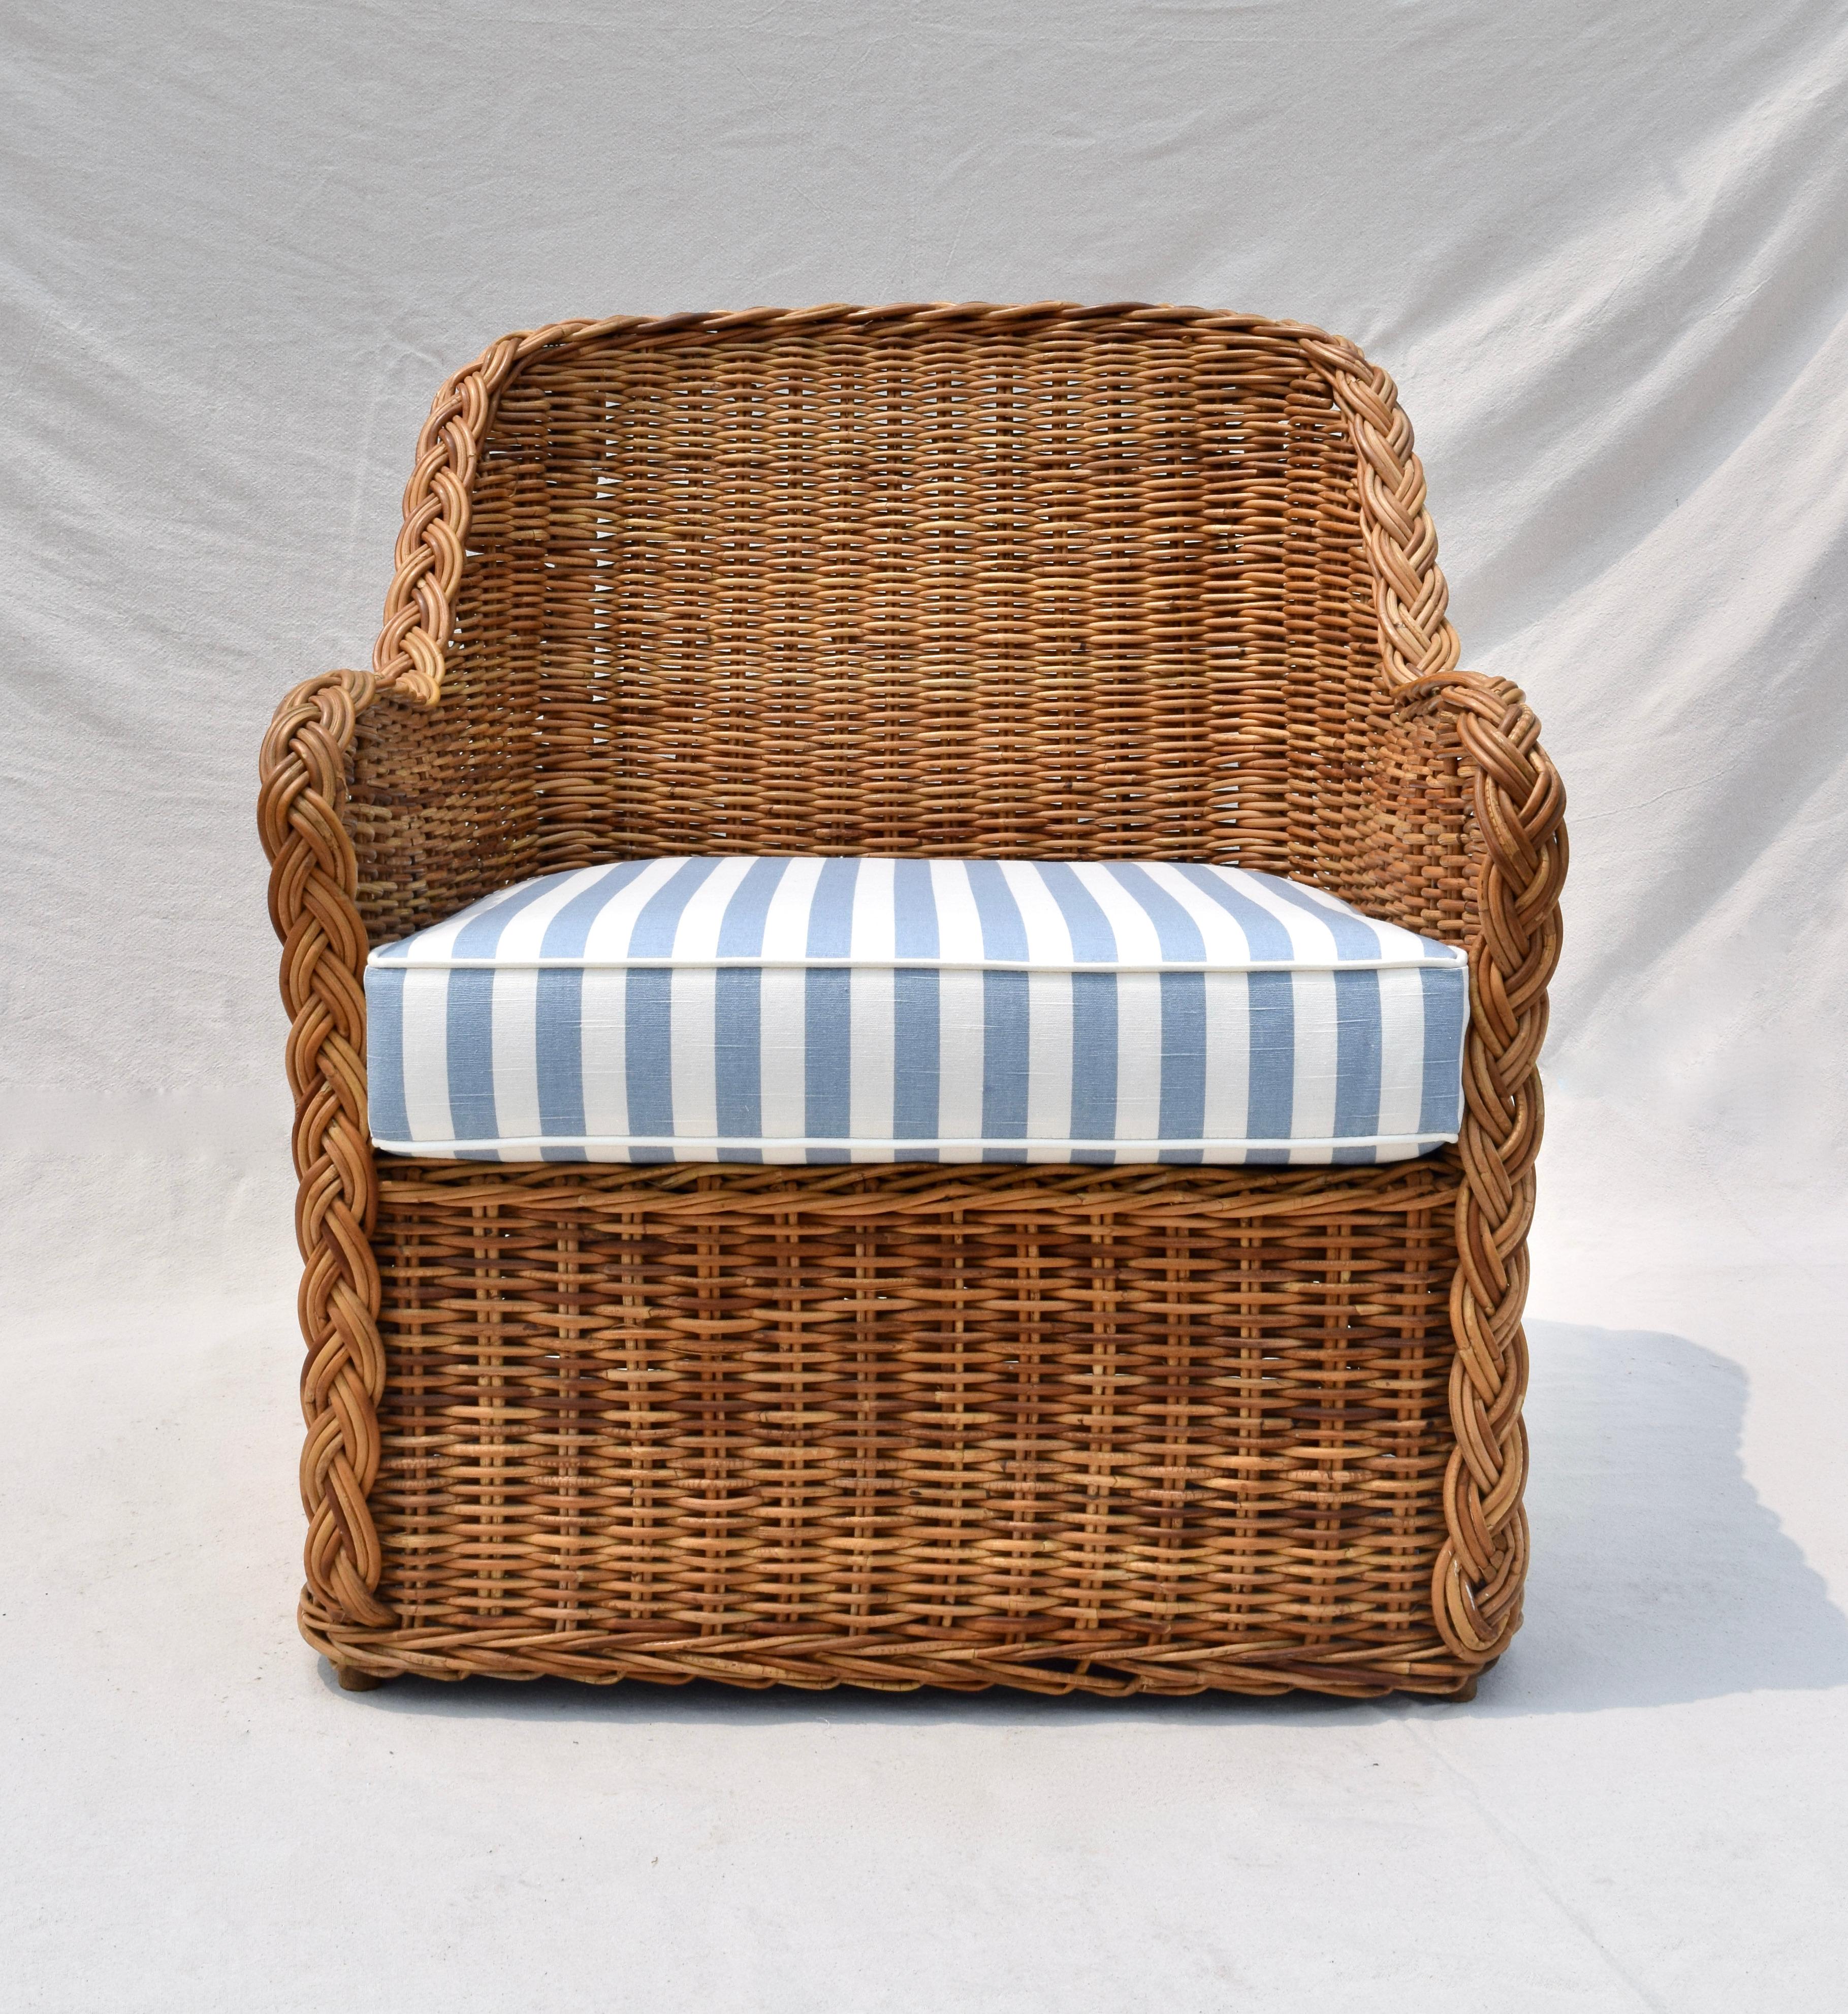 Michael Taylor braided wicker rattan armchair with new seat & goose down back cushions upholstered in new stock vintage Ralph Lauren sky blue and white cotton linen. Seat: 17